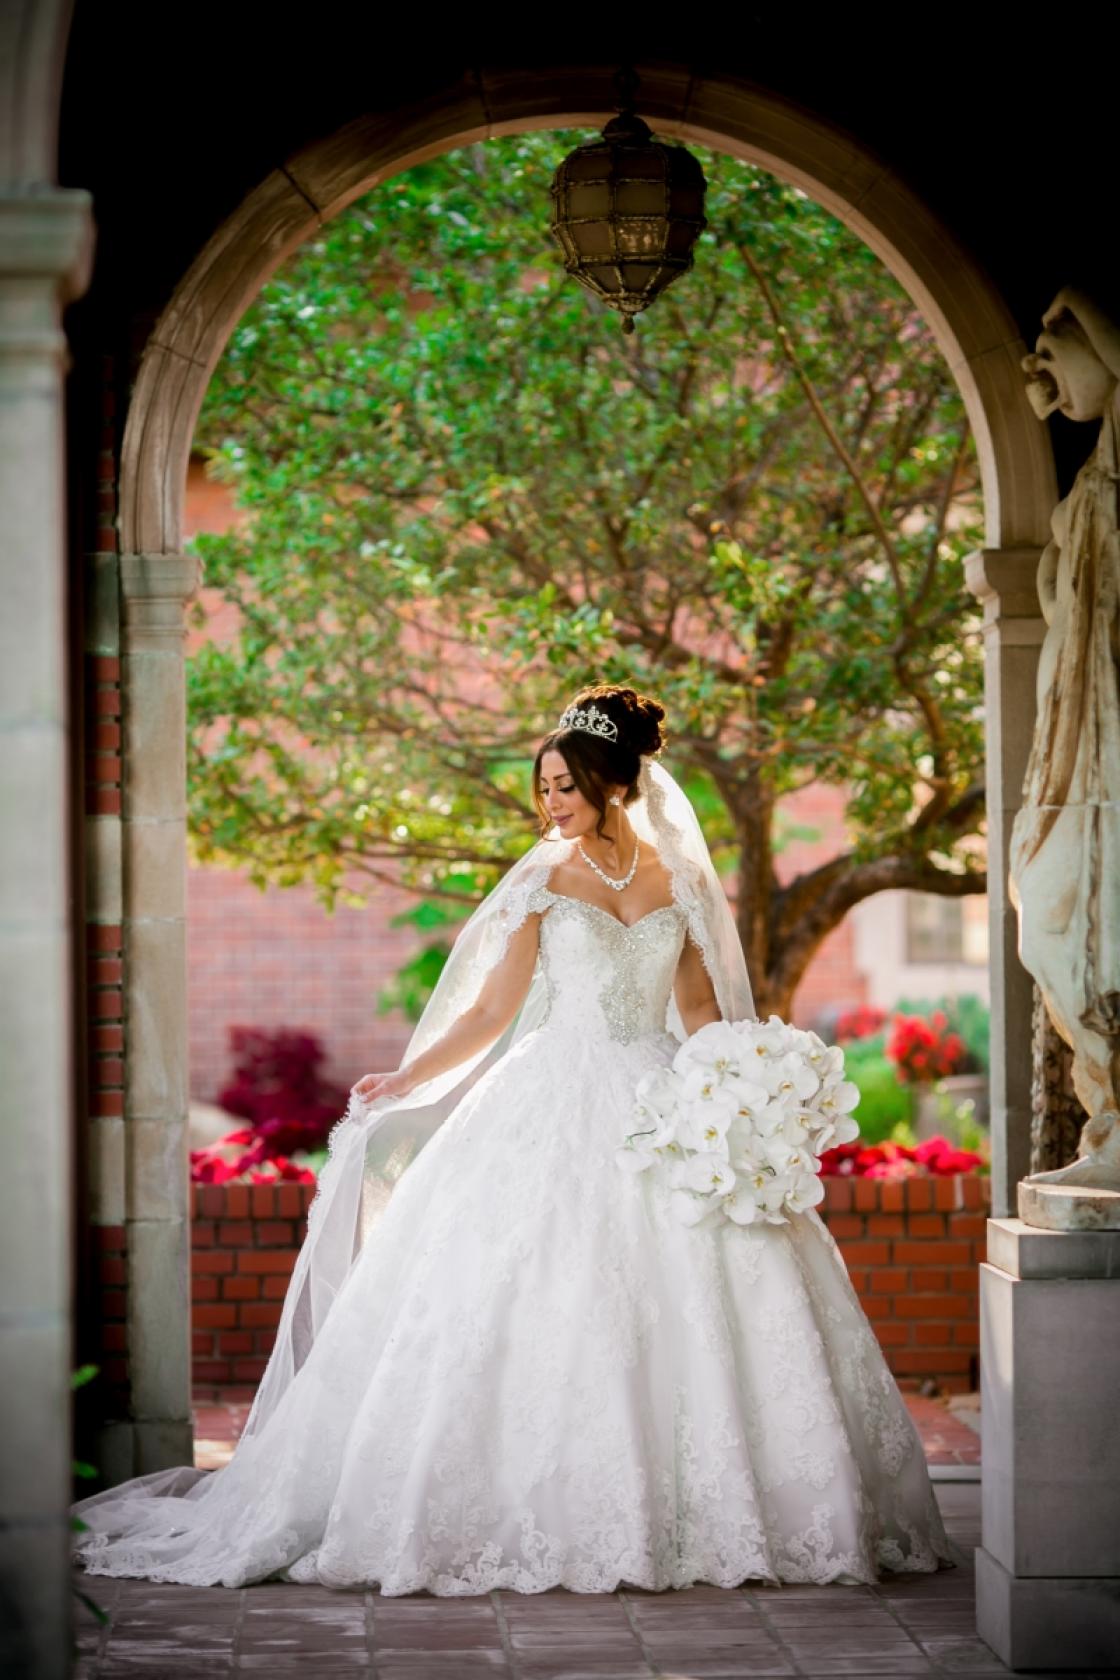 Photograph of a bride in the Cranbrook House Courtyard by FutureWave Images.